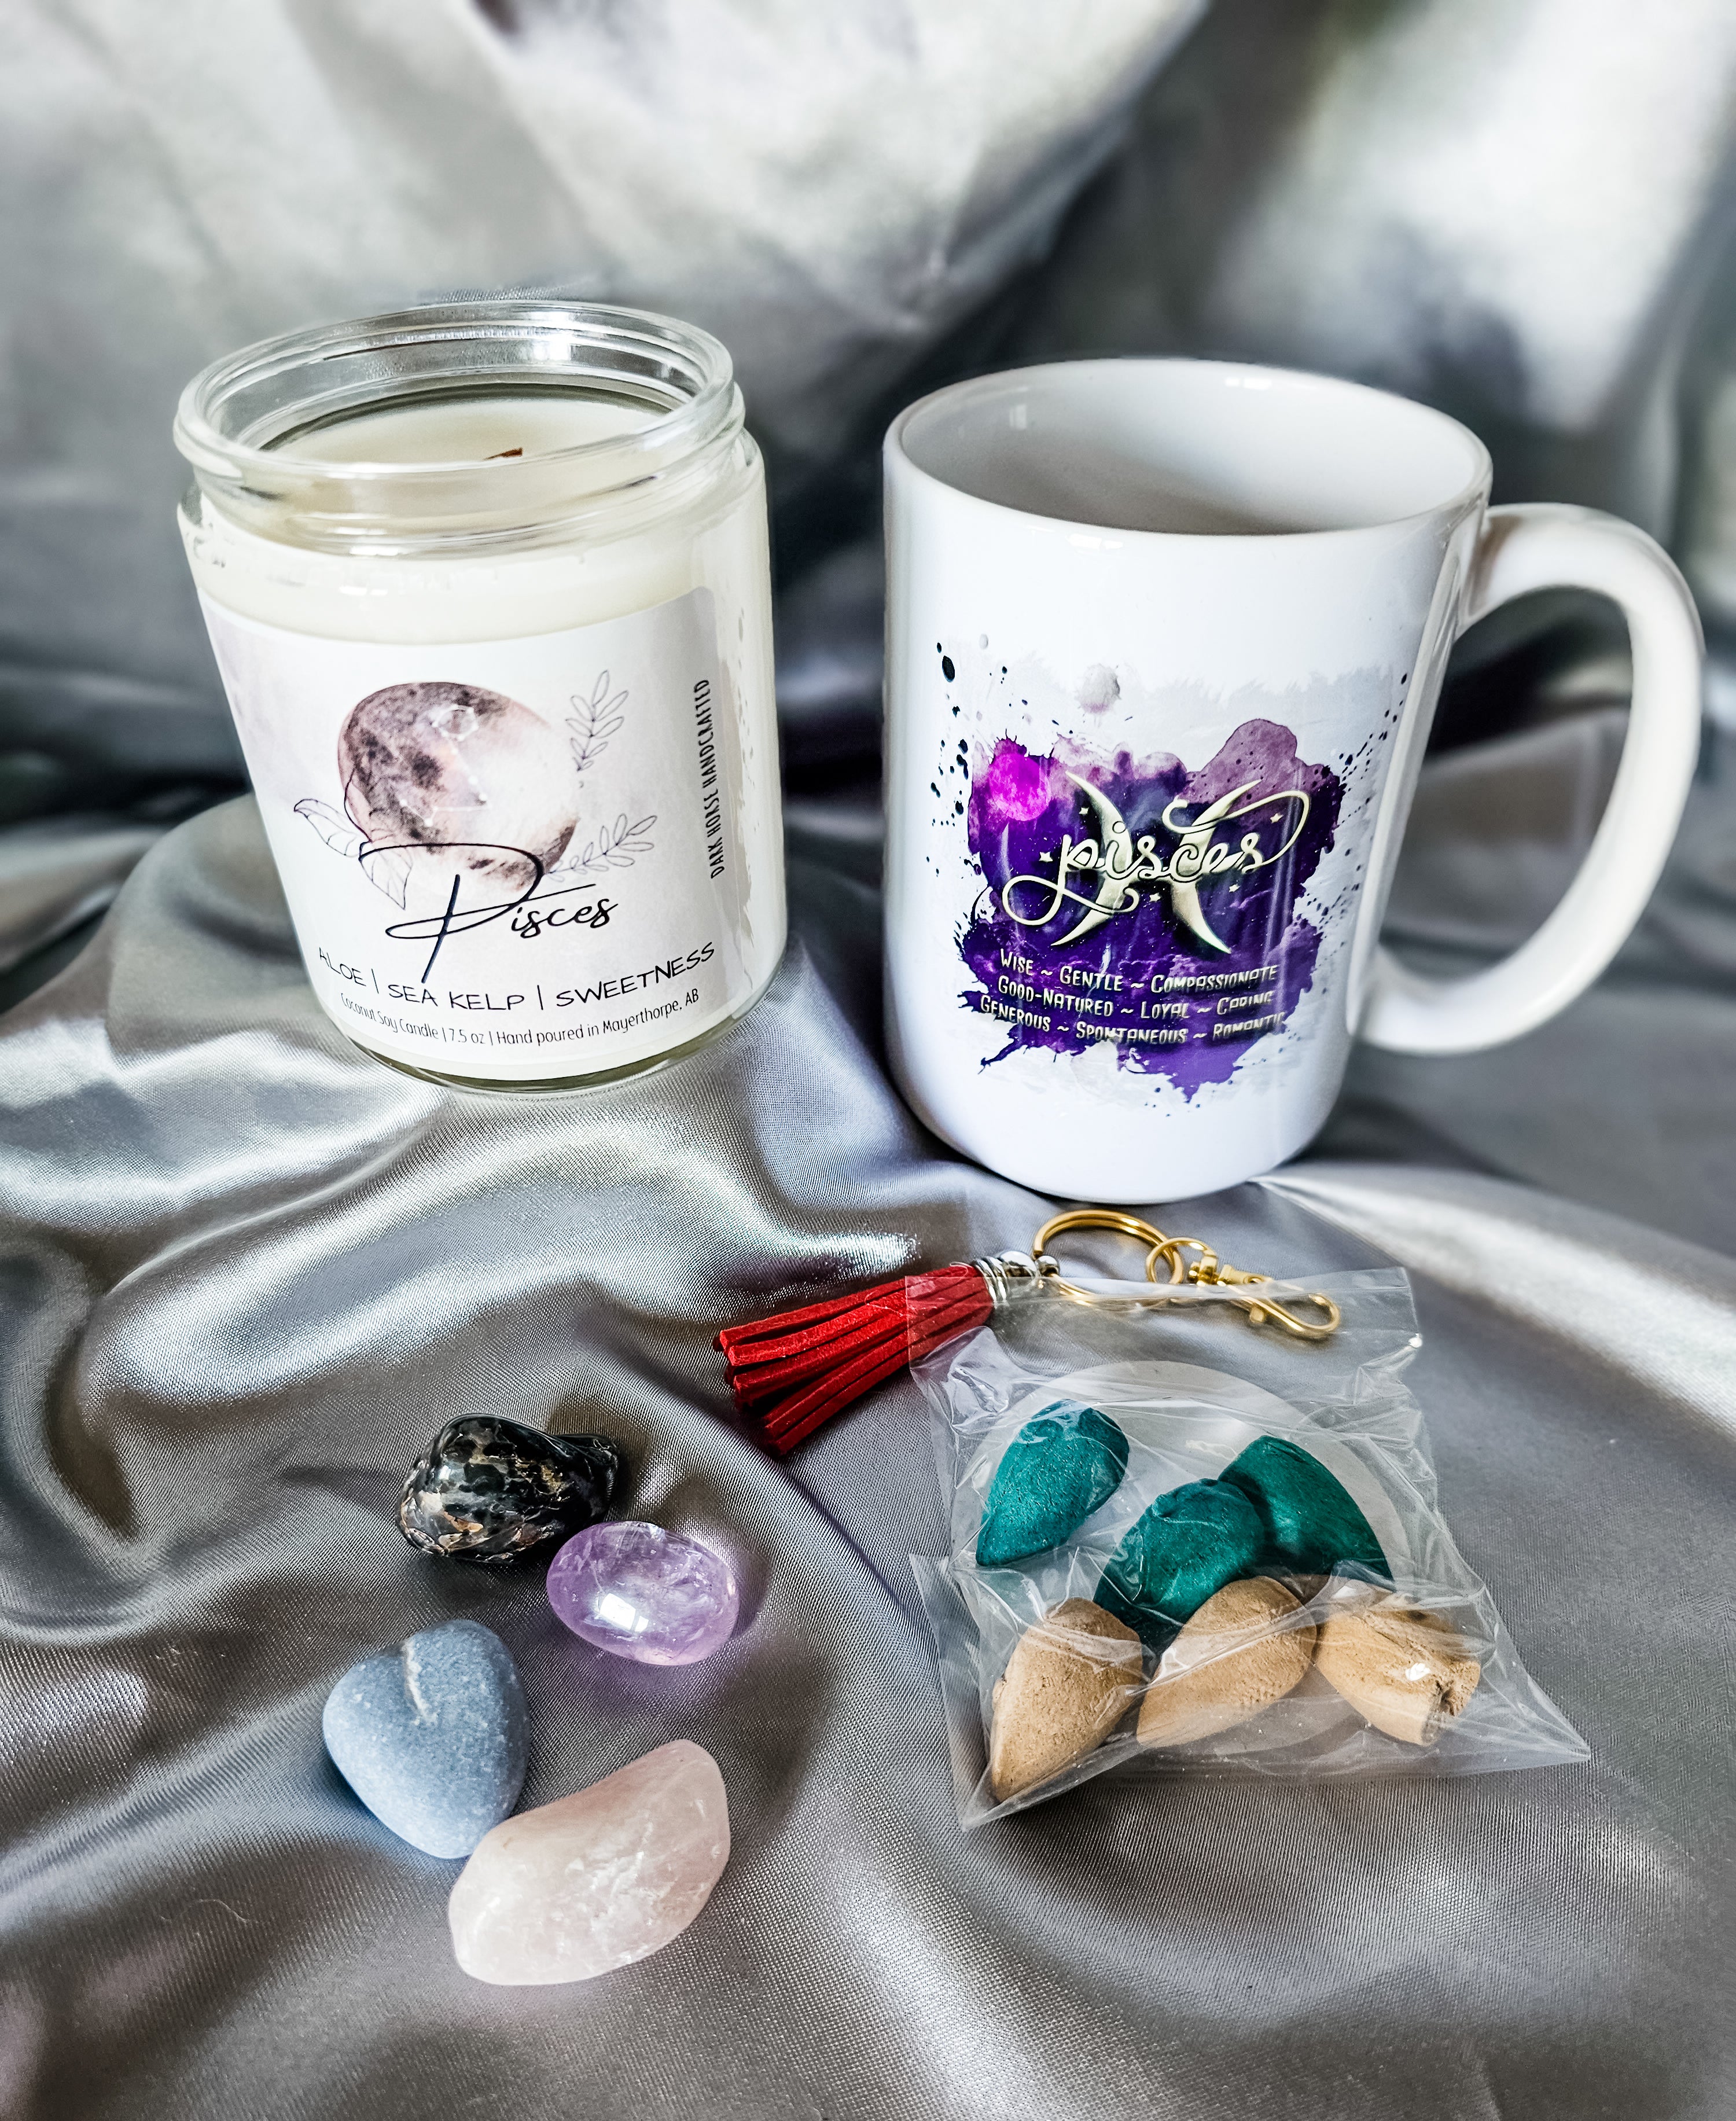 Pisces zodiac candle gift box with mug, tumbled stones and incense cones.